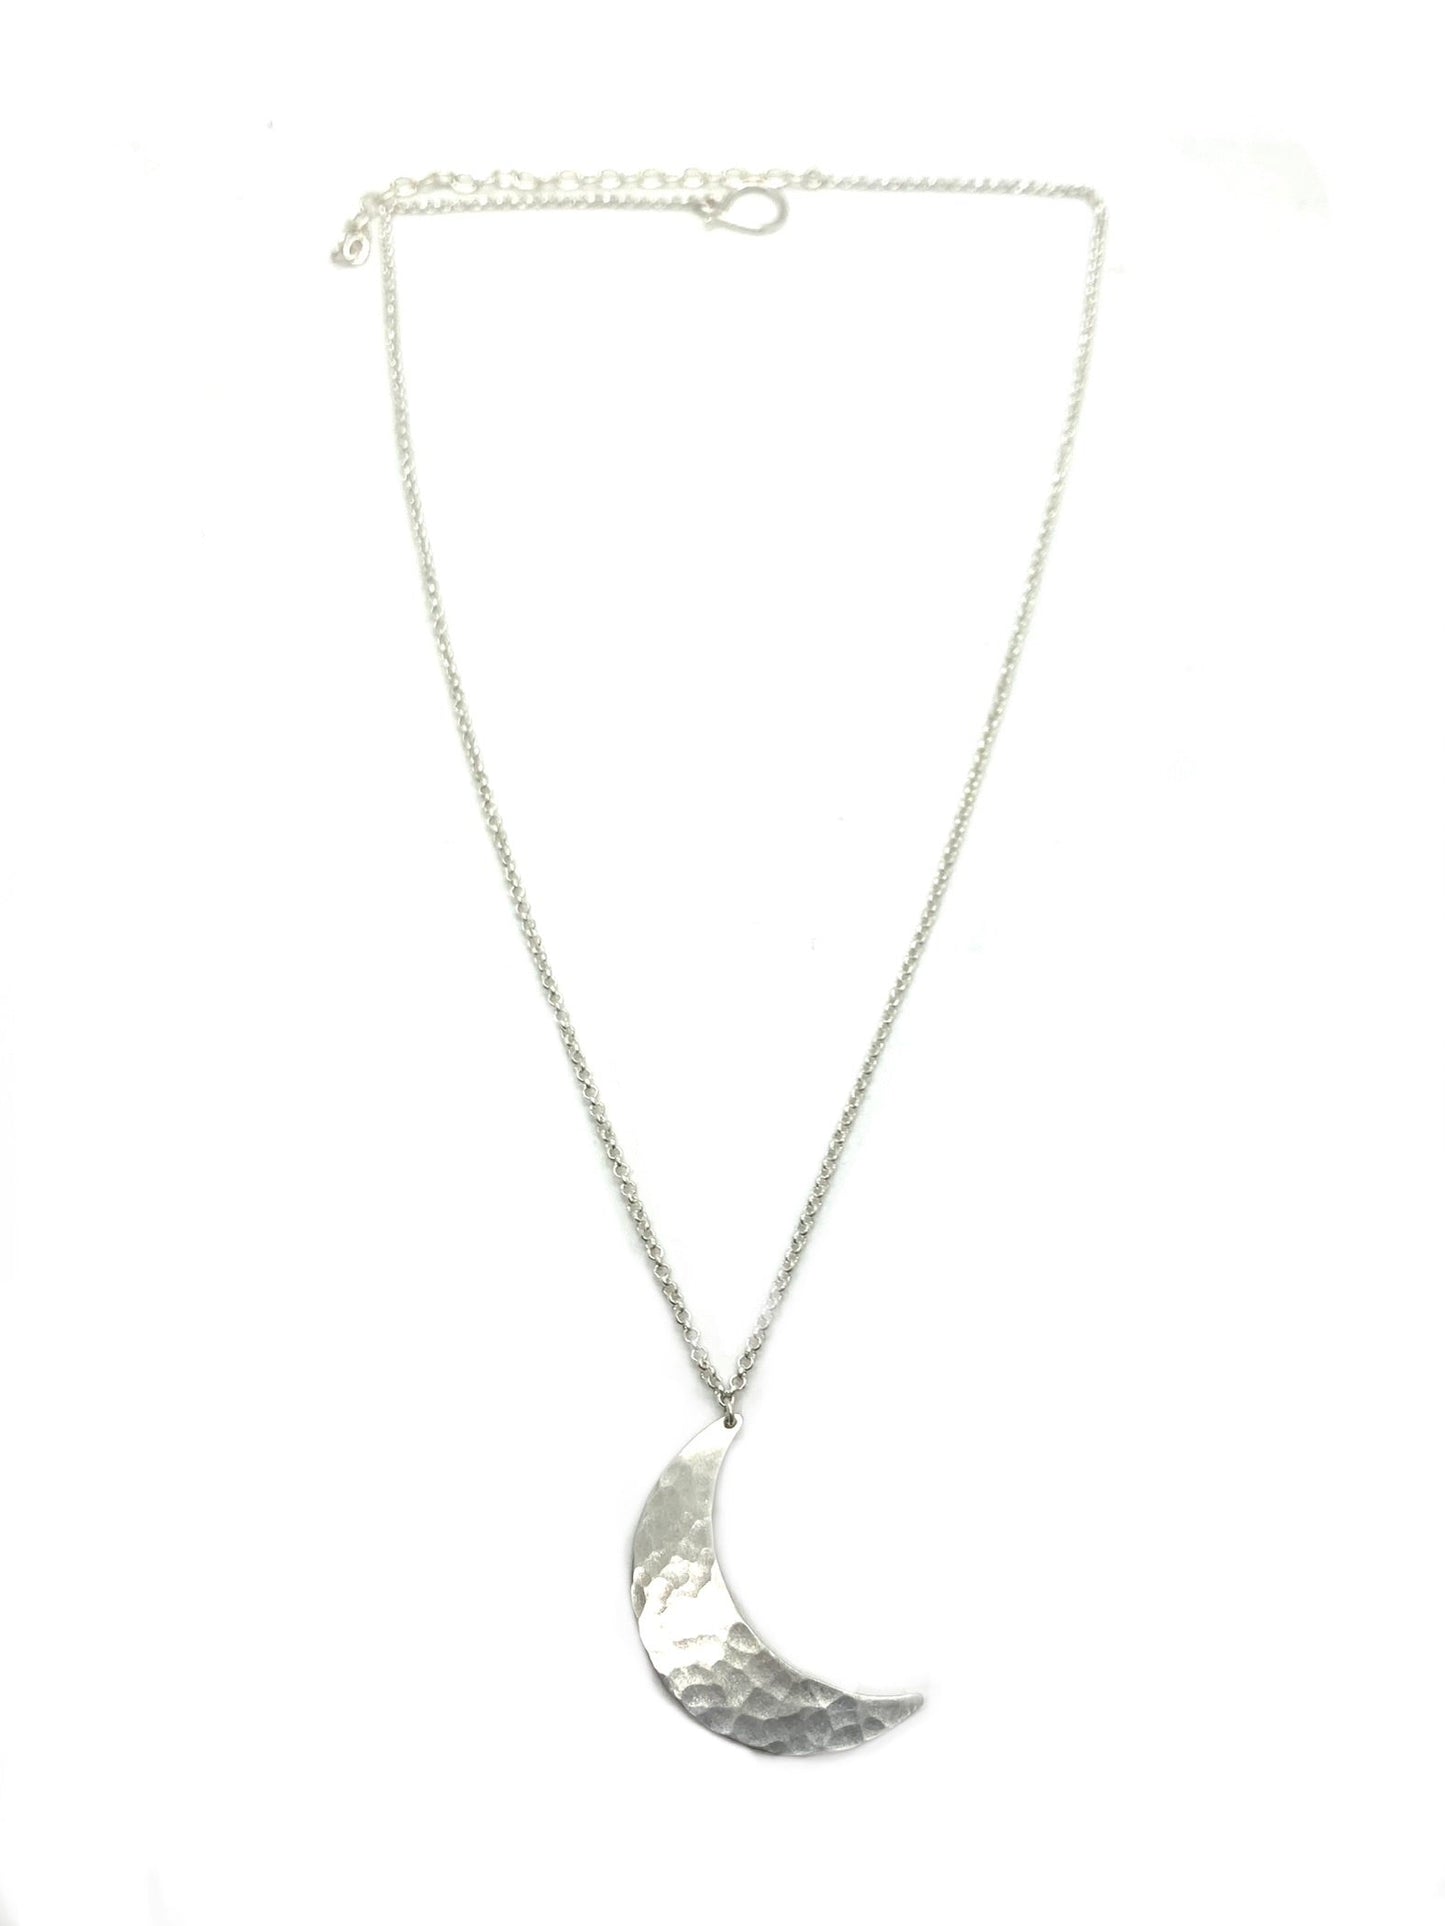 Crescent Moon Necklace at Heal